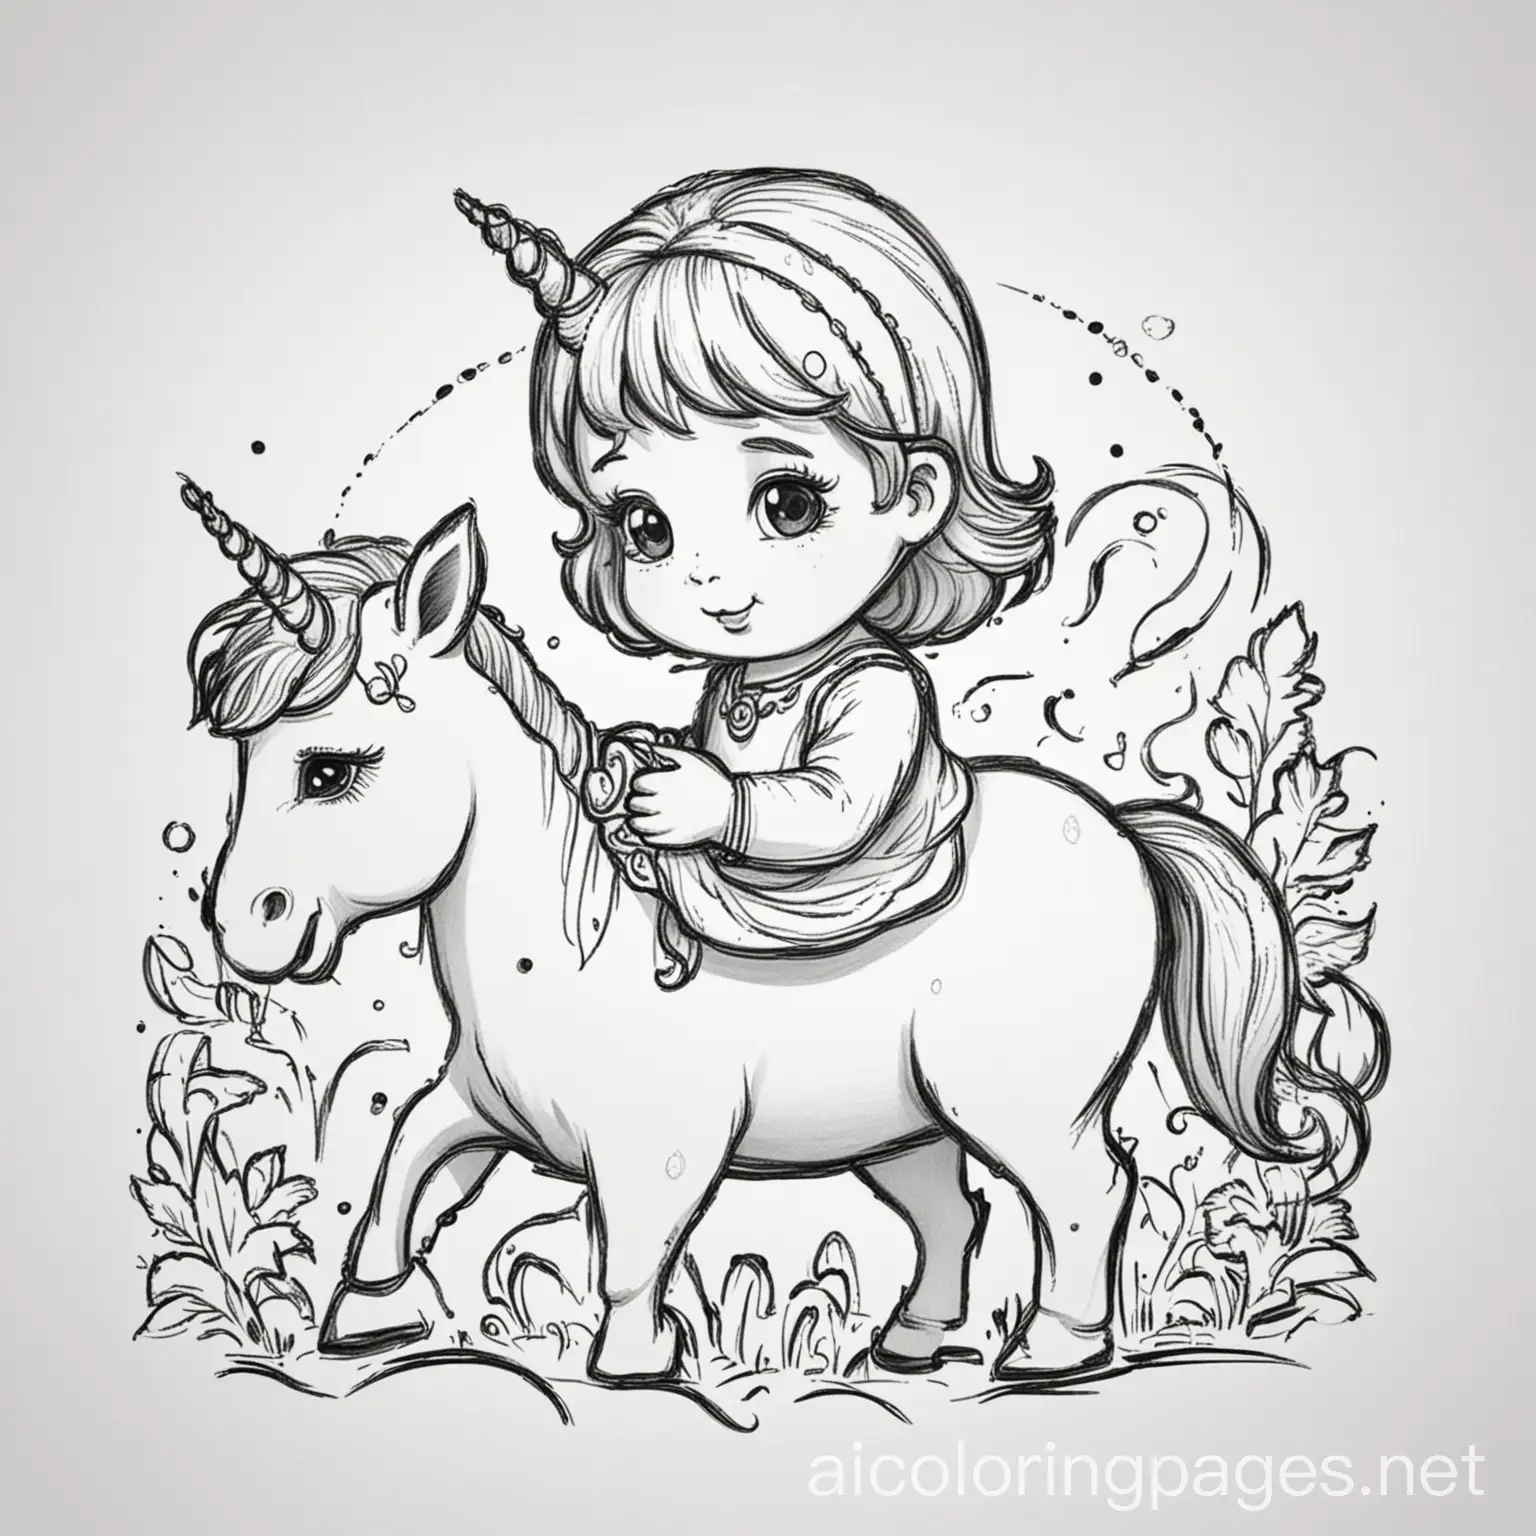 A human baby playing with a unicorn, Coloring Page, black and white, line art, white background, Simplicity, Ample White Space, Coloring Page, black and white, line art, white background, Simplicity, Ample White Space. The background of the coloring page is plain white to make it easy for young children to color within the lines. The outlines of all the subjects are easy to distinguish, making it simple for kids to color without too much difficulty